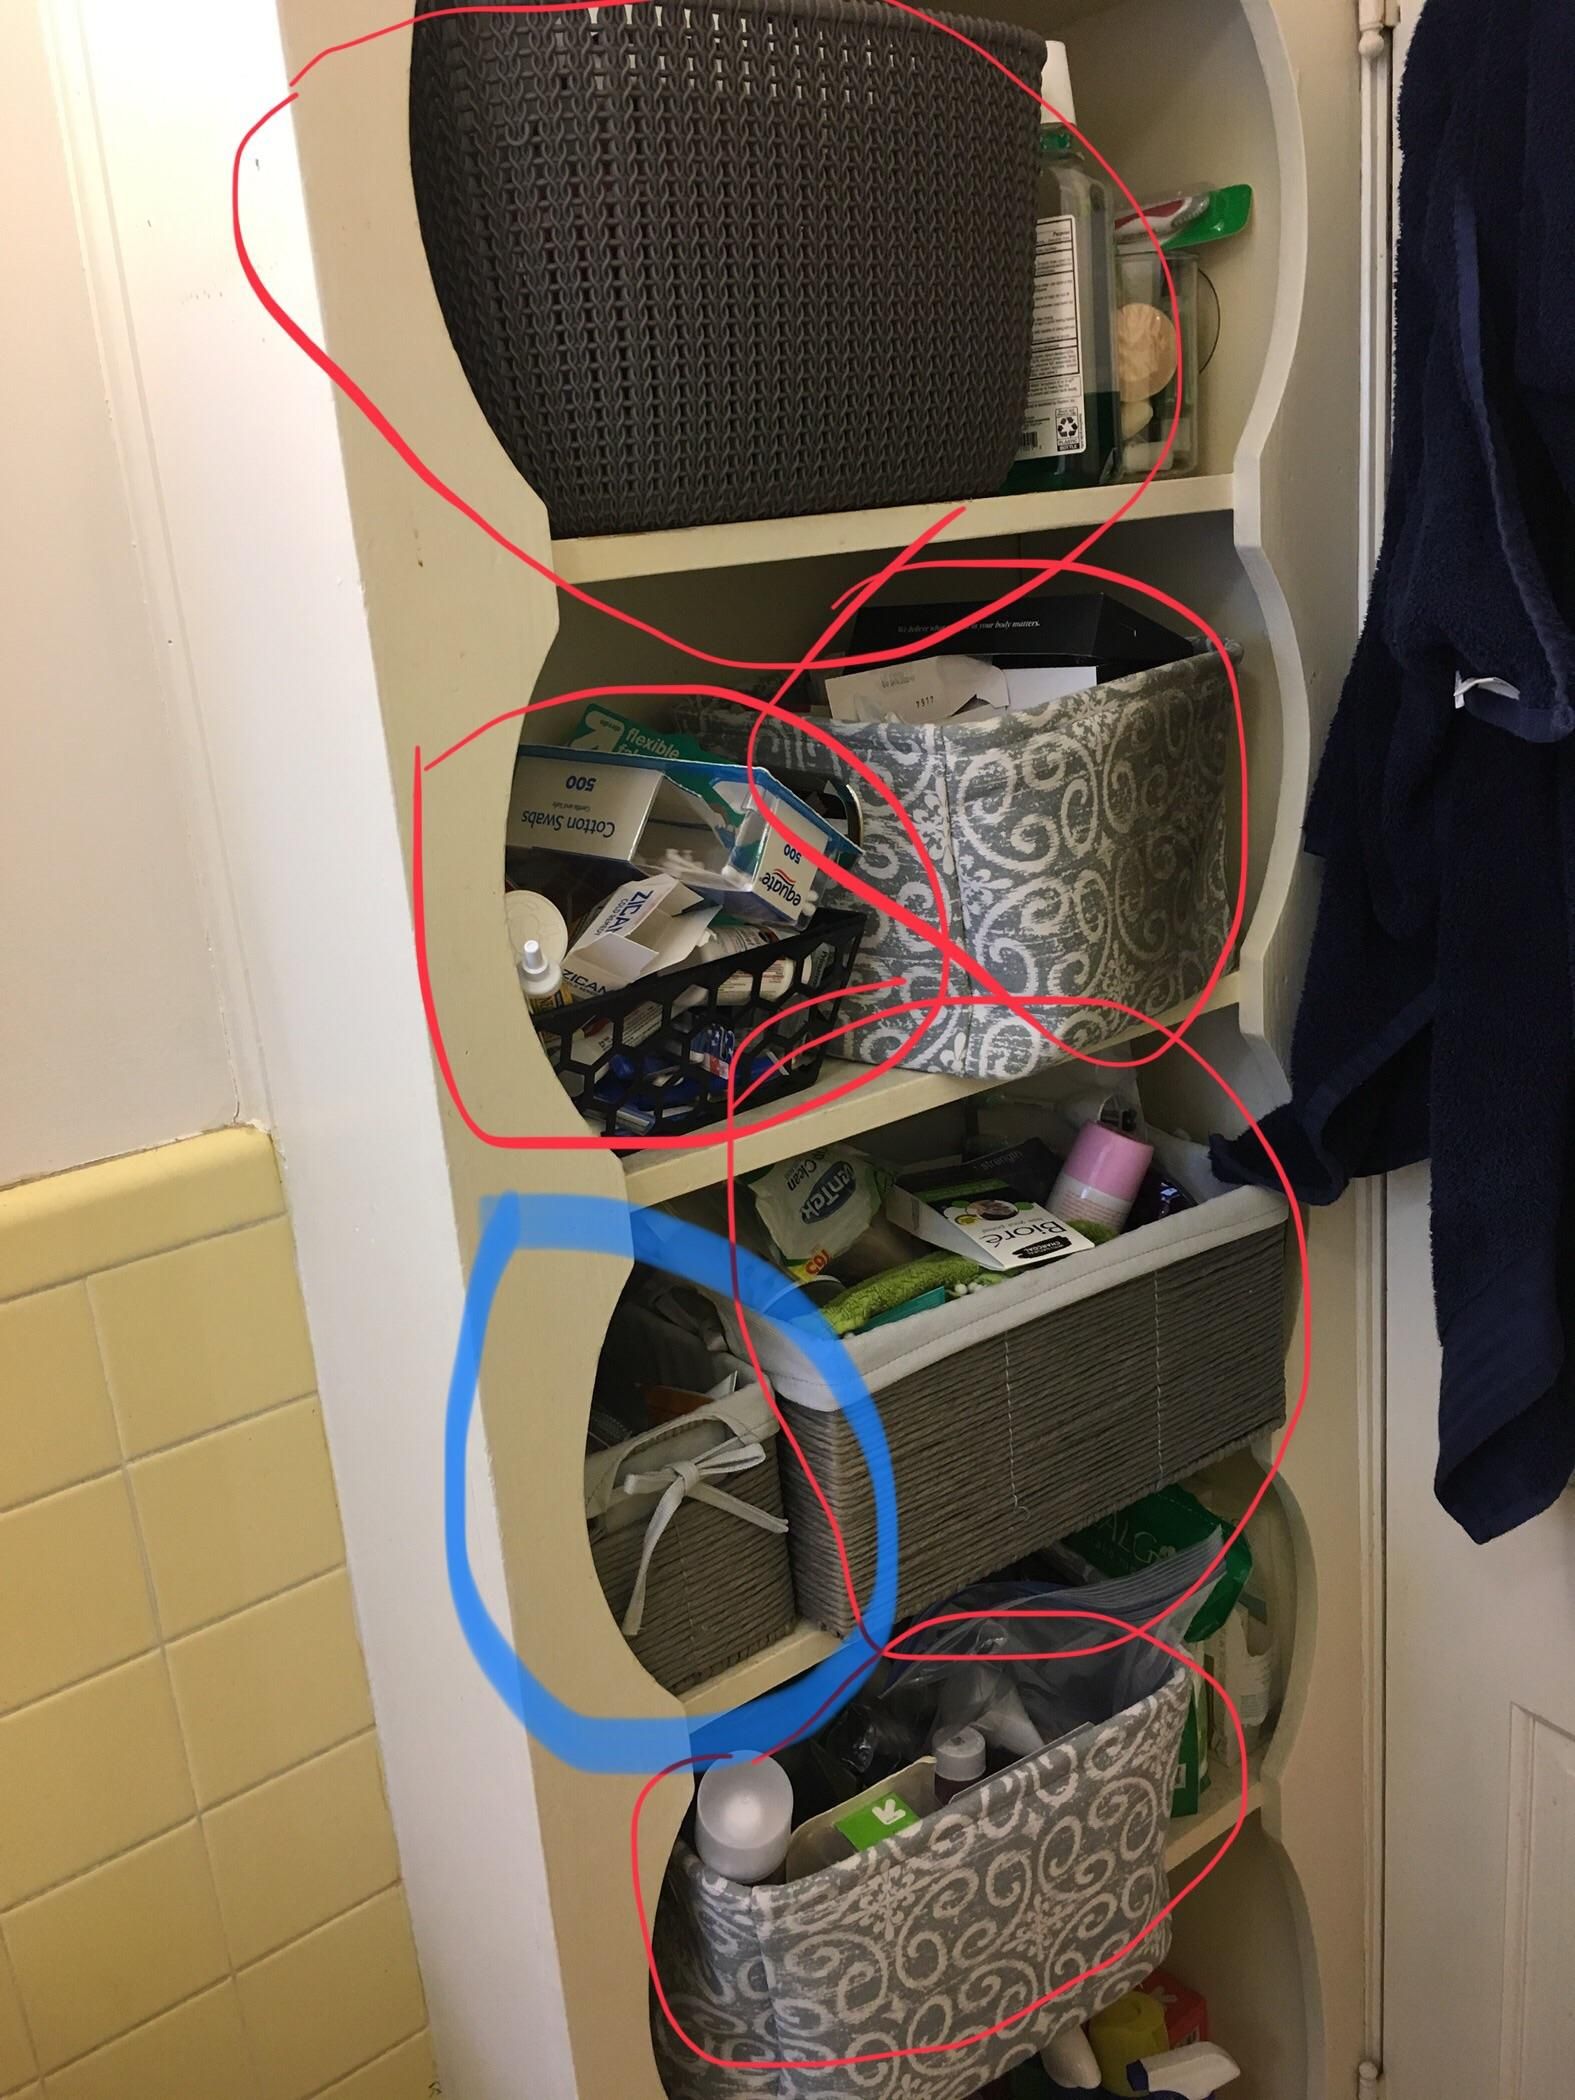 My girlfriend and I share storage space in our bathroom. The baskets circled in red belong to her. The basket in blue is mine.